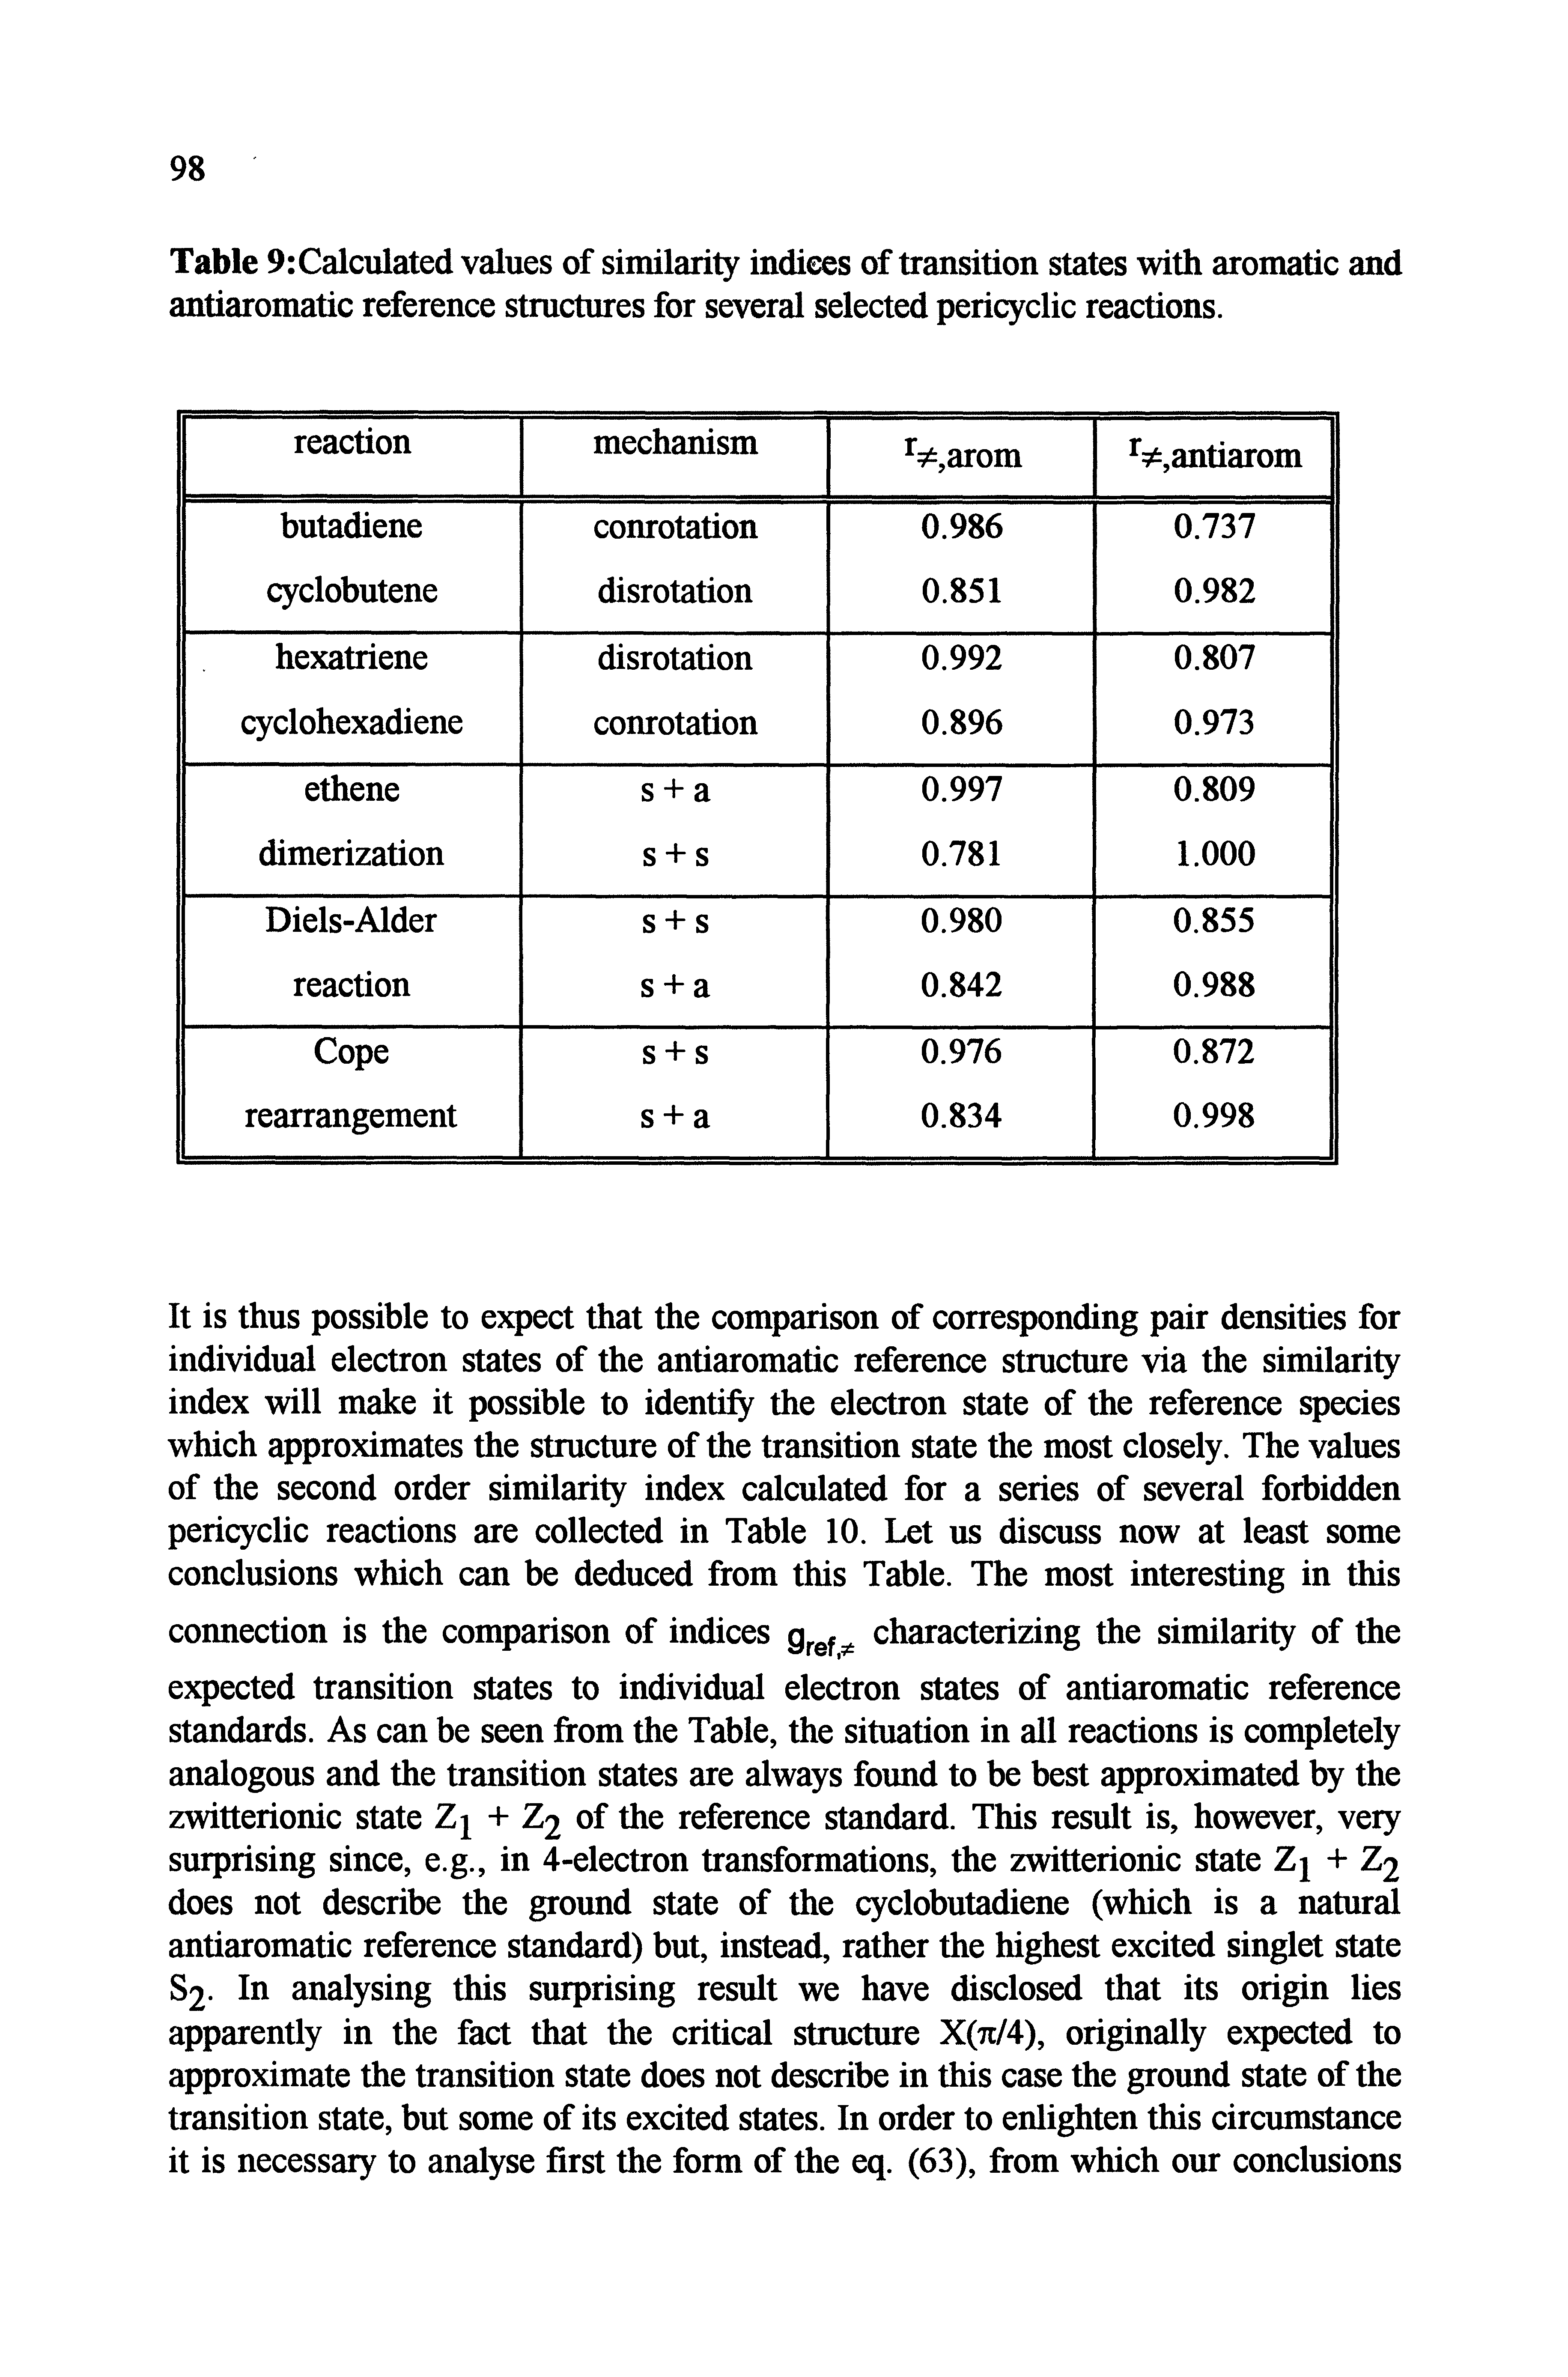 Table 9 Calculated values of similarity indices of transition states with aromatic and antiaromatic reference structures for several selected pericyclic reactions.